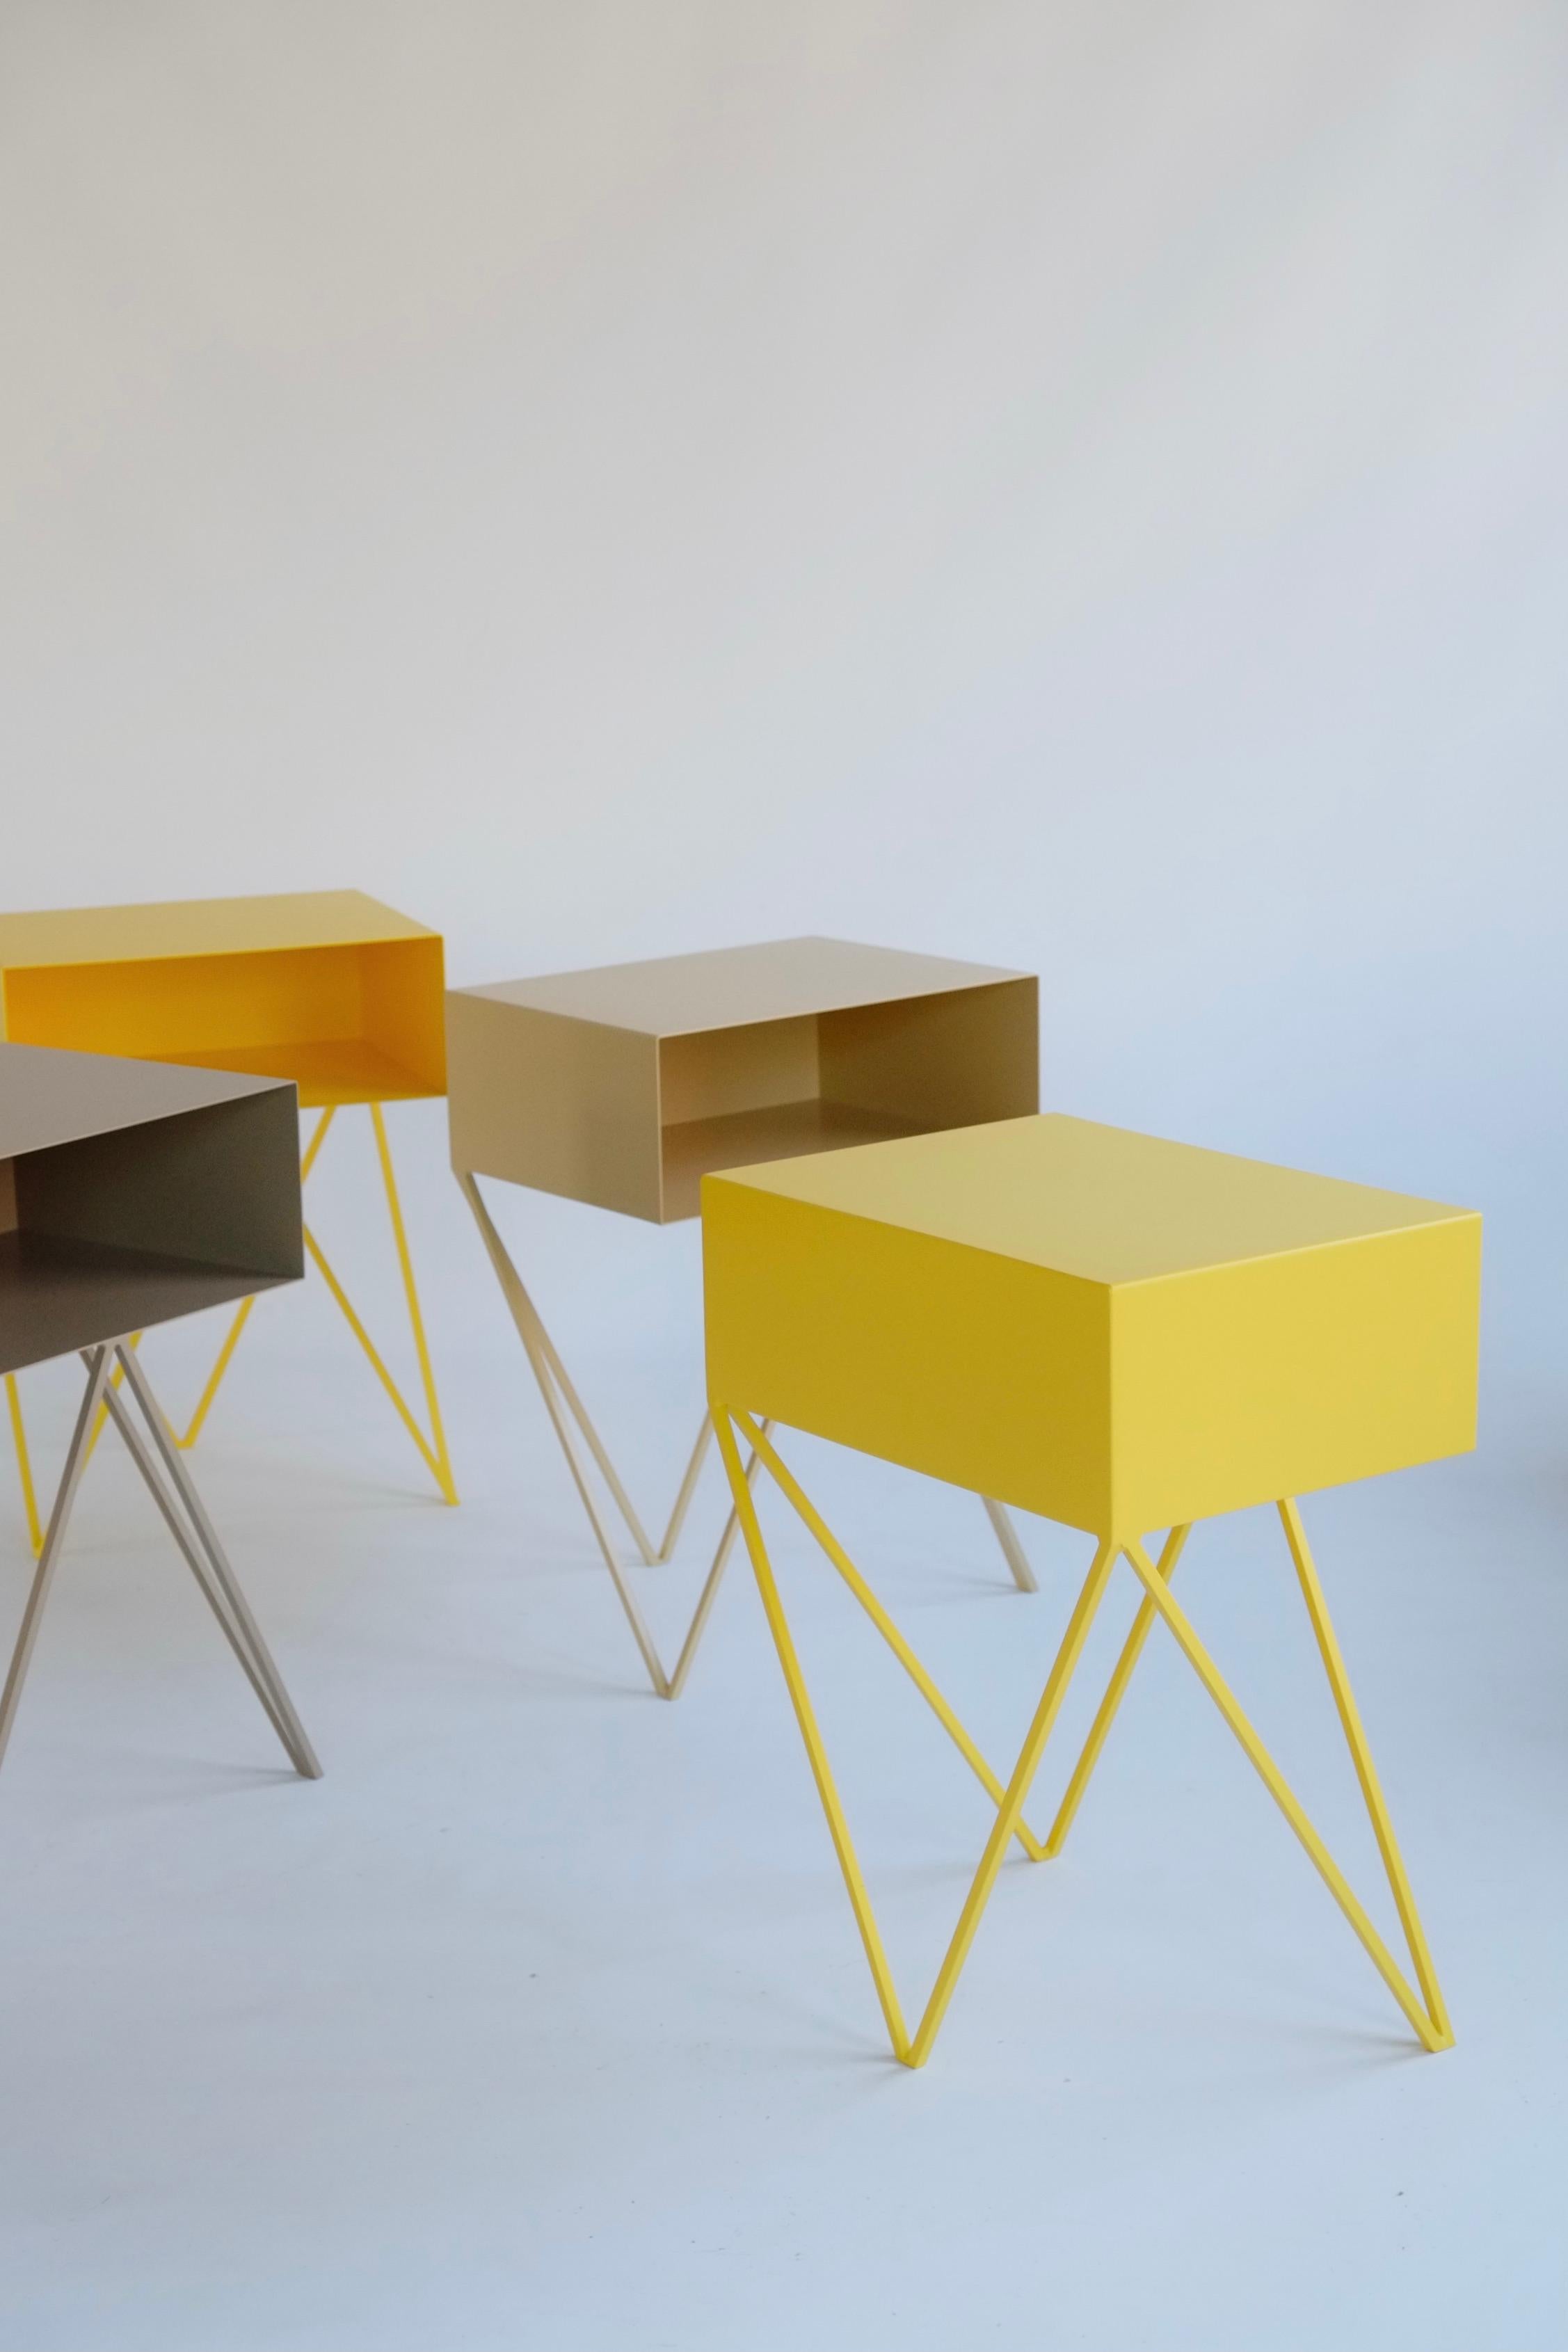 Powder-Coated Pair of Mismatched Yellow and Butternut Robot Bedside Tables - Nightstands For Sale